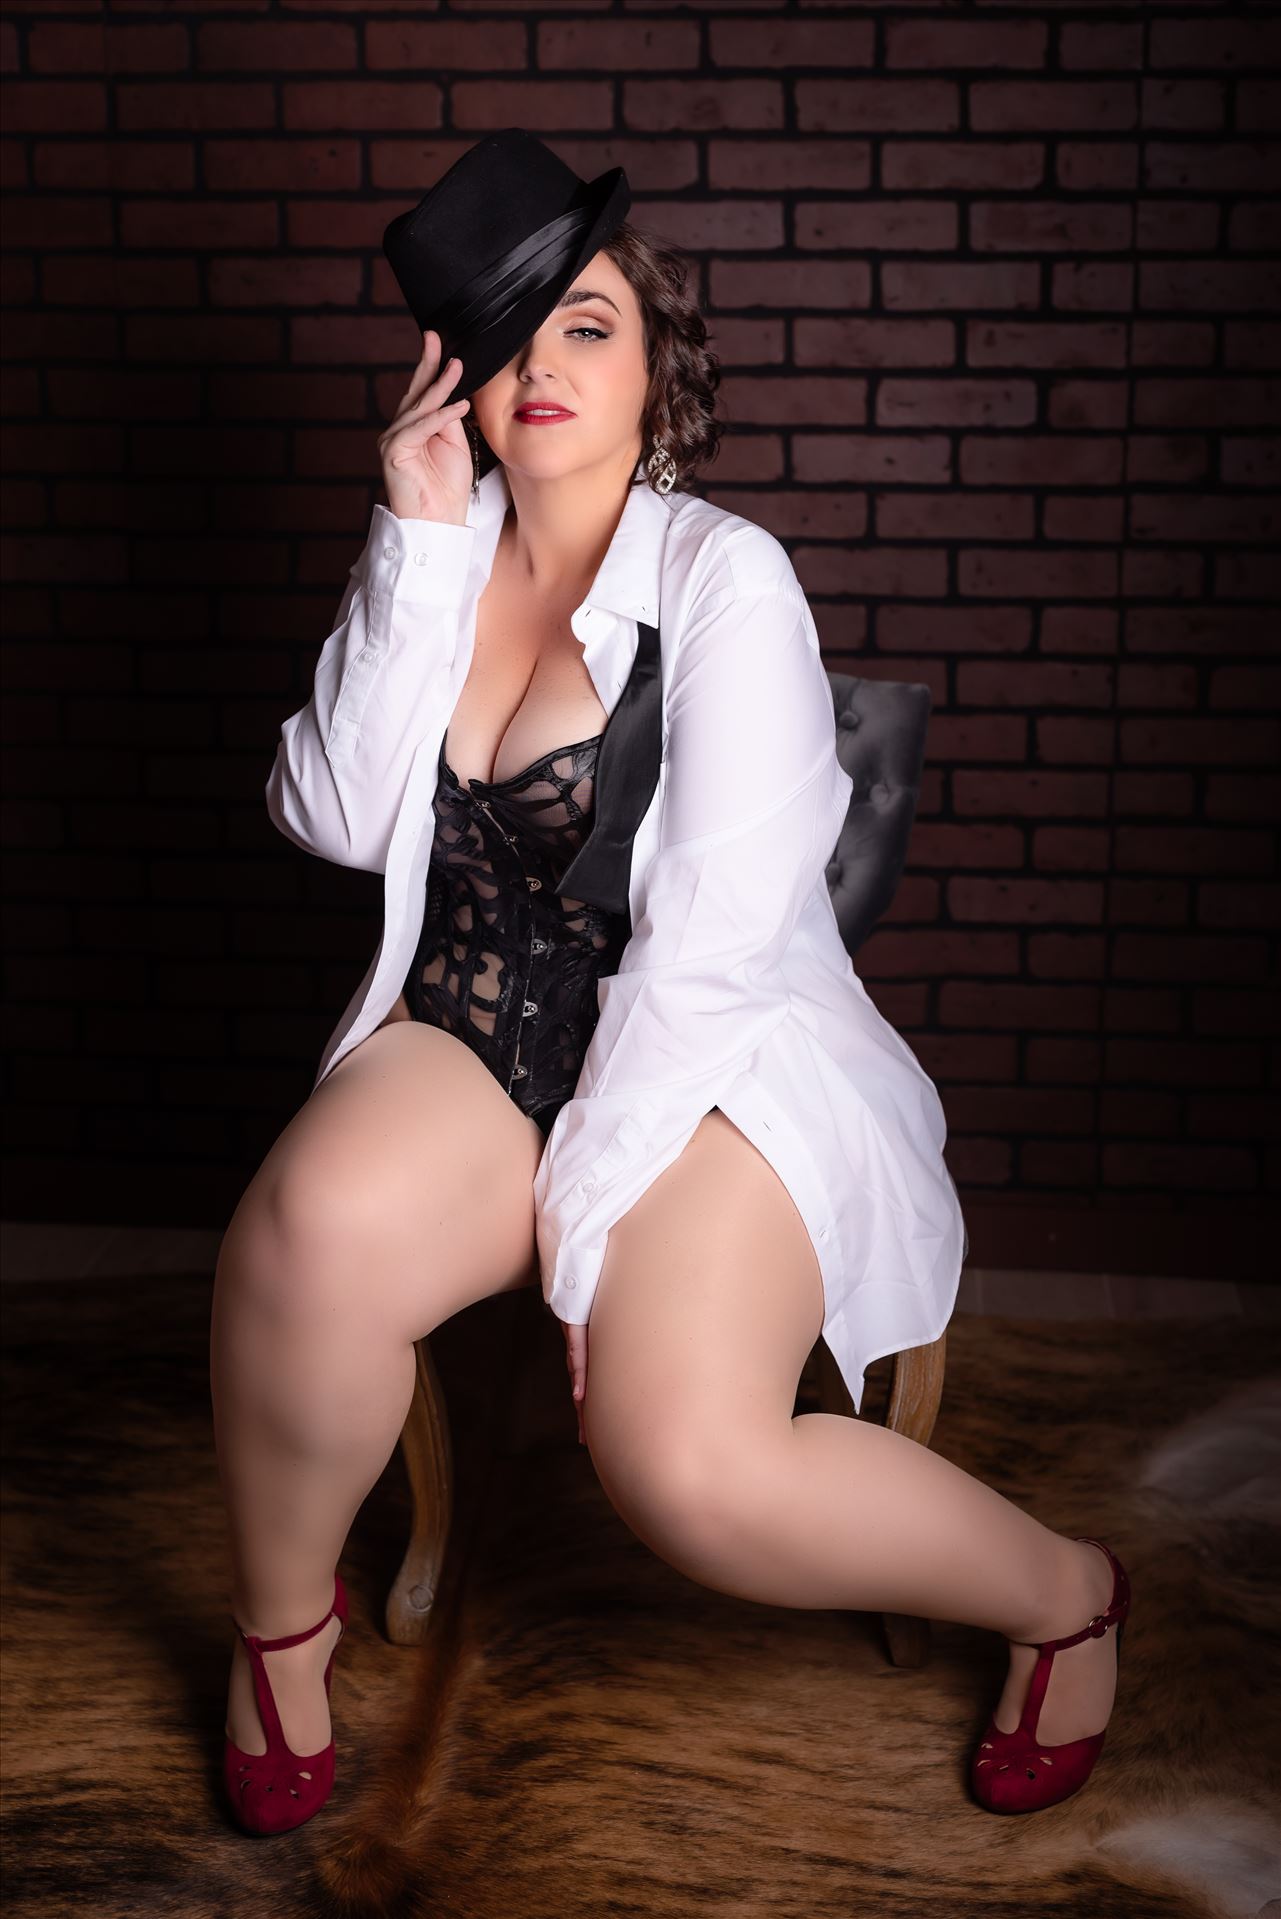 Album-4044.JPG - Beachfront Boudoir by Mirror's Edge Photography is a Boutique Luxury Boudoir Photography Studio located just blocks from the beach in Oceano, California. My mission is to show as many women as possible how beautiful they truly are! by Sarah Williams